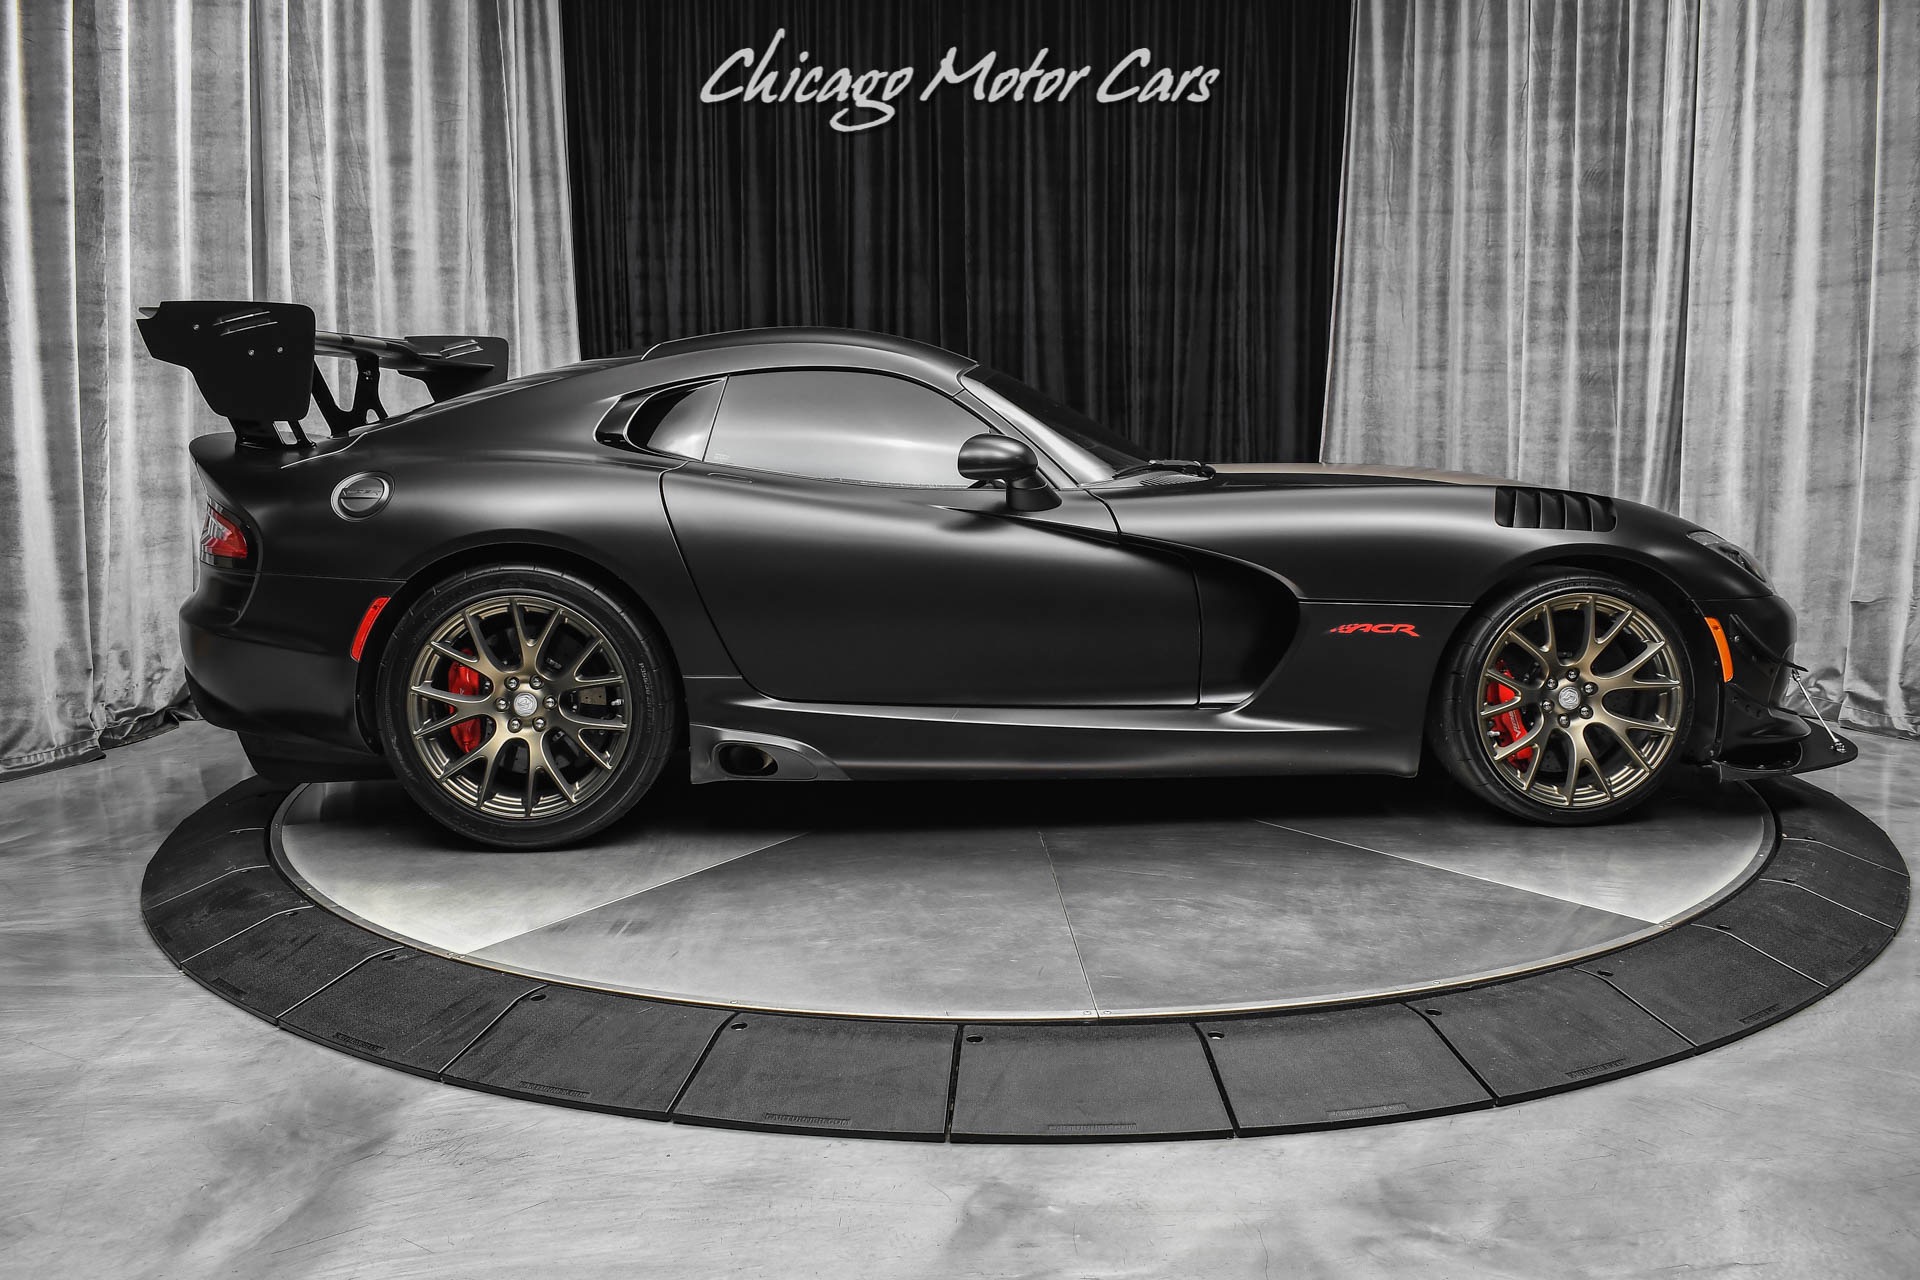 Used-2017-Dodge-Viper-GTC-ACR-Extreme-Aero-VERY-SPECIAL-FACTORY-BUILD--00001